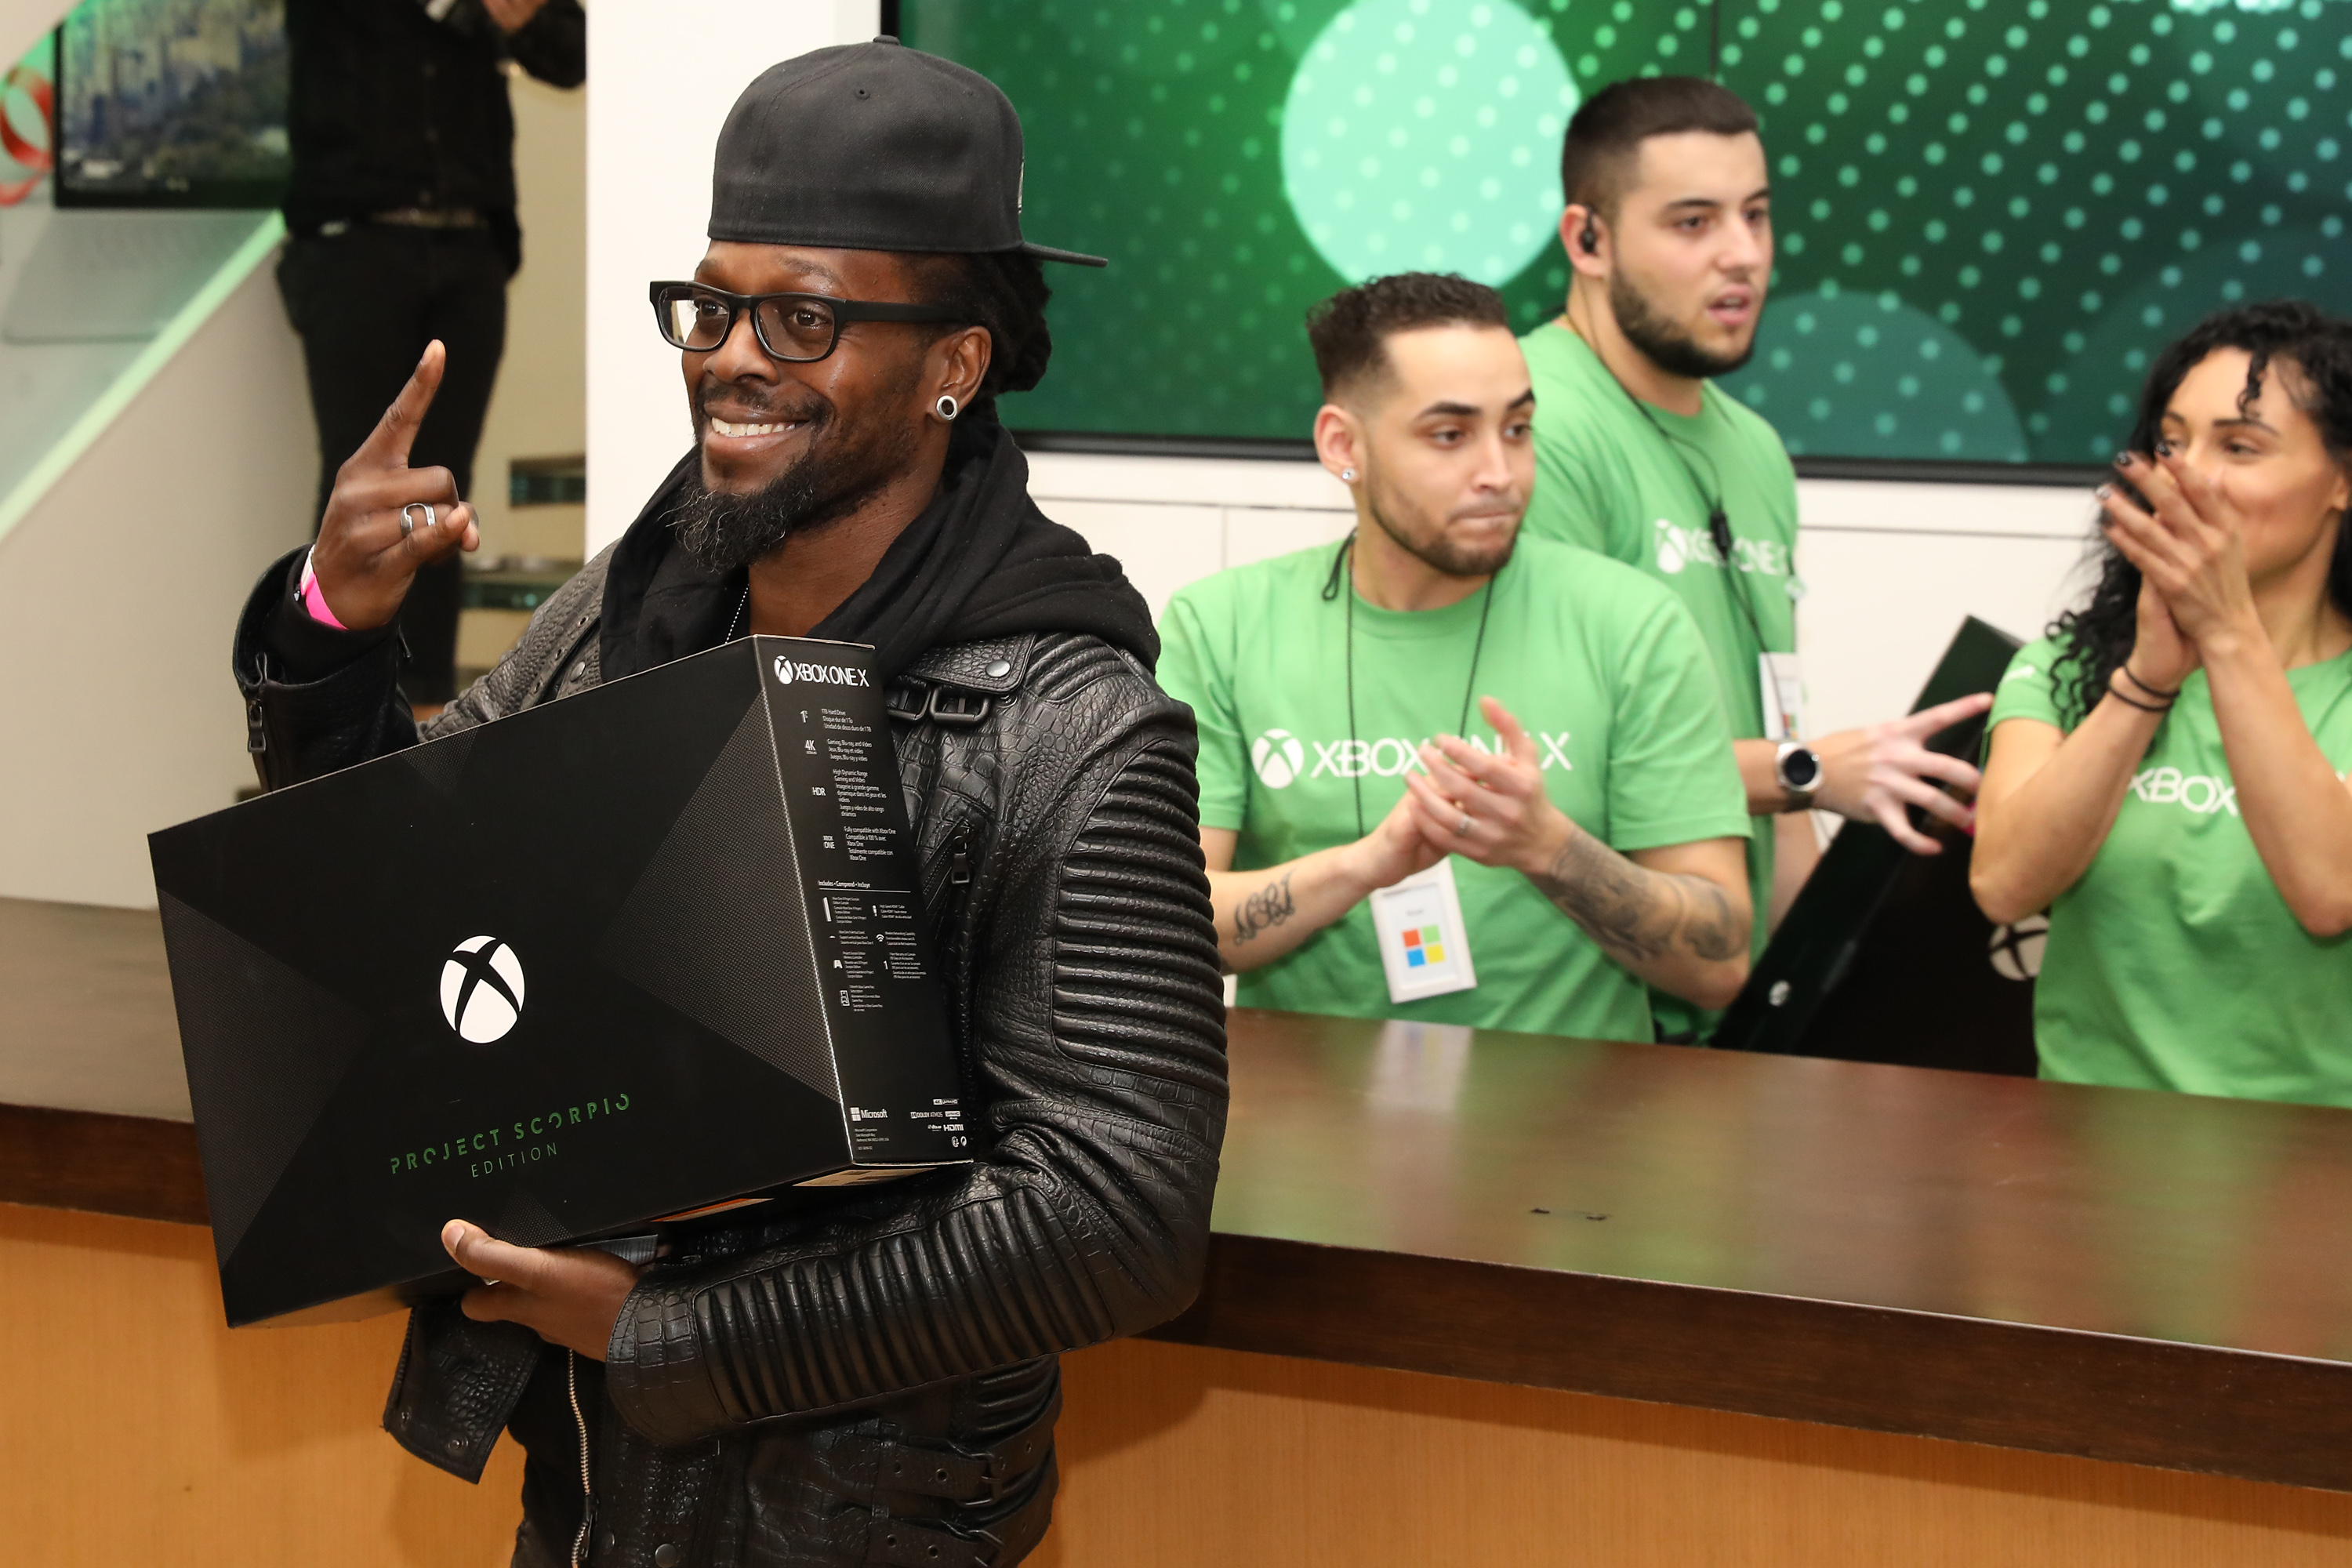 A fan celebrates purchasing an Xbox One X Project Scorpio Edition at the flagship Microsoft Store on Fifth Avenue on Tuesday, Nov. 7th, 2017, in New York City. (Photo by Amy Sussman/Invision for Microsoft/AP Images)